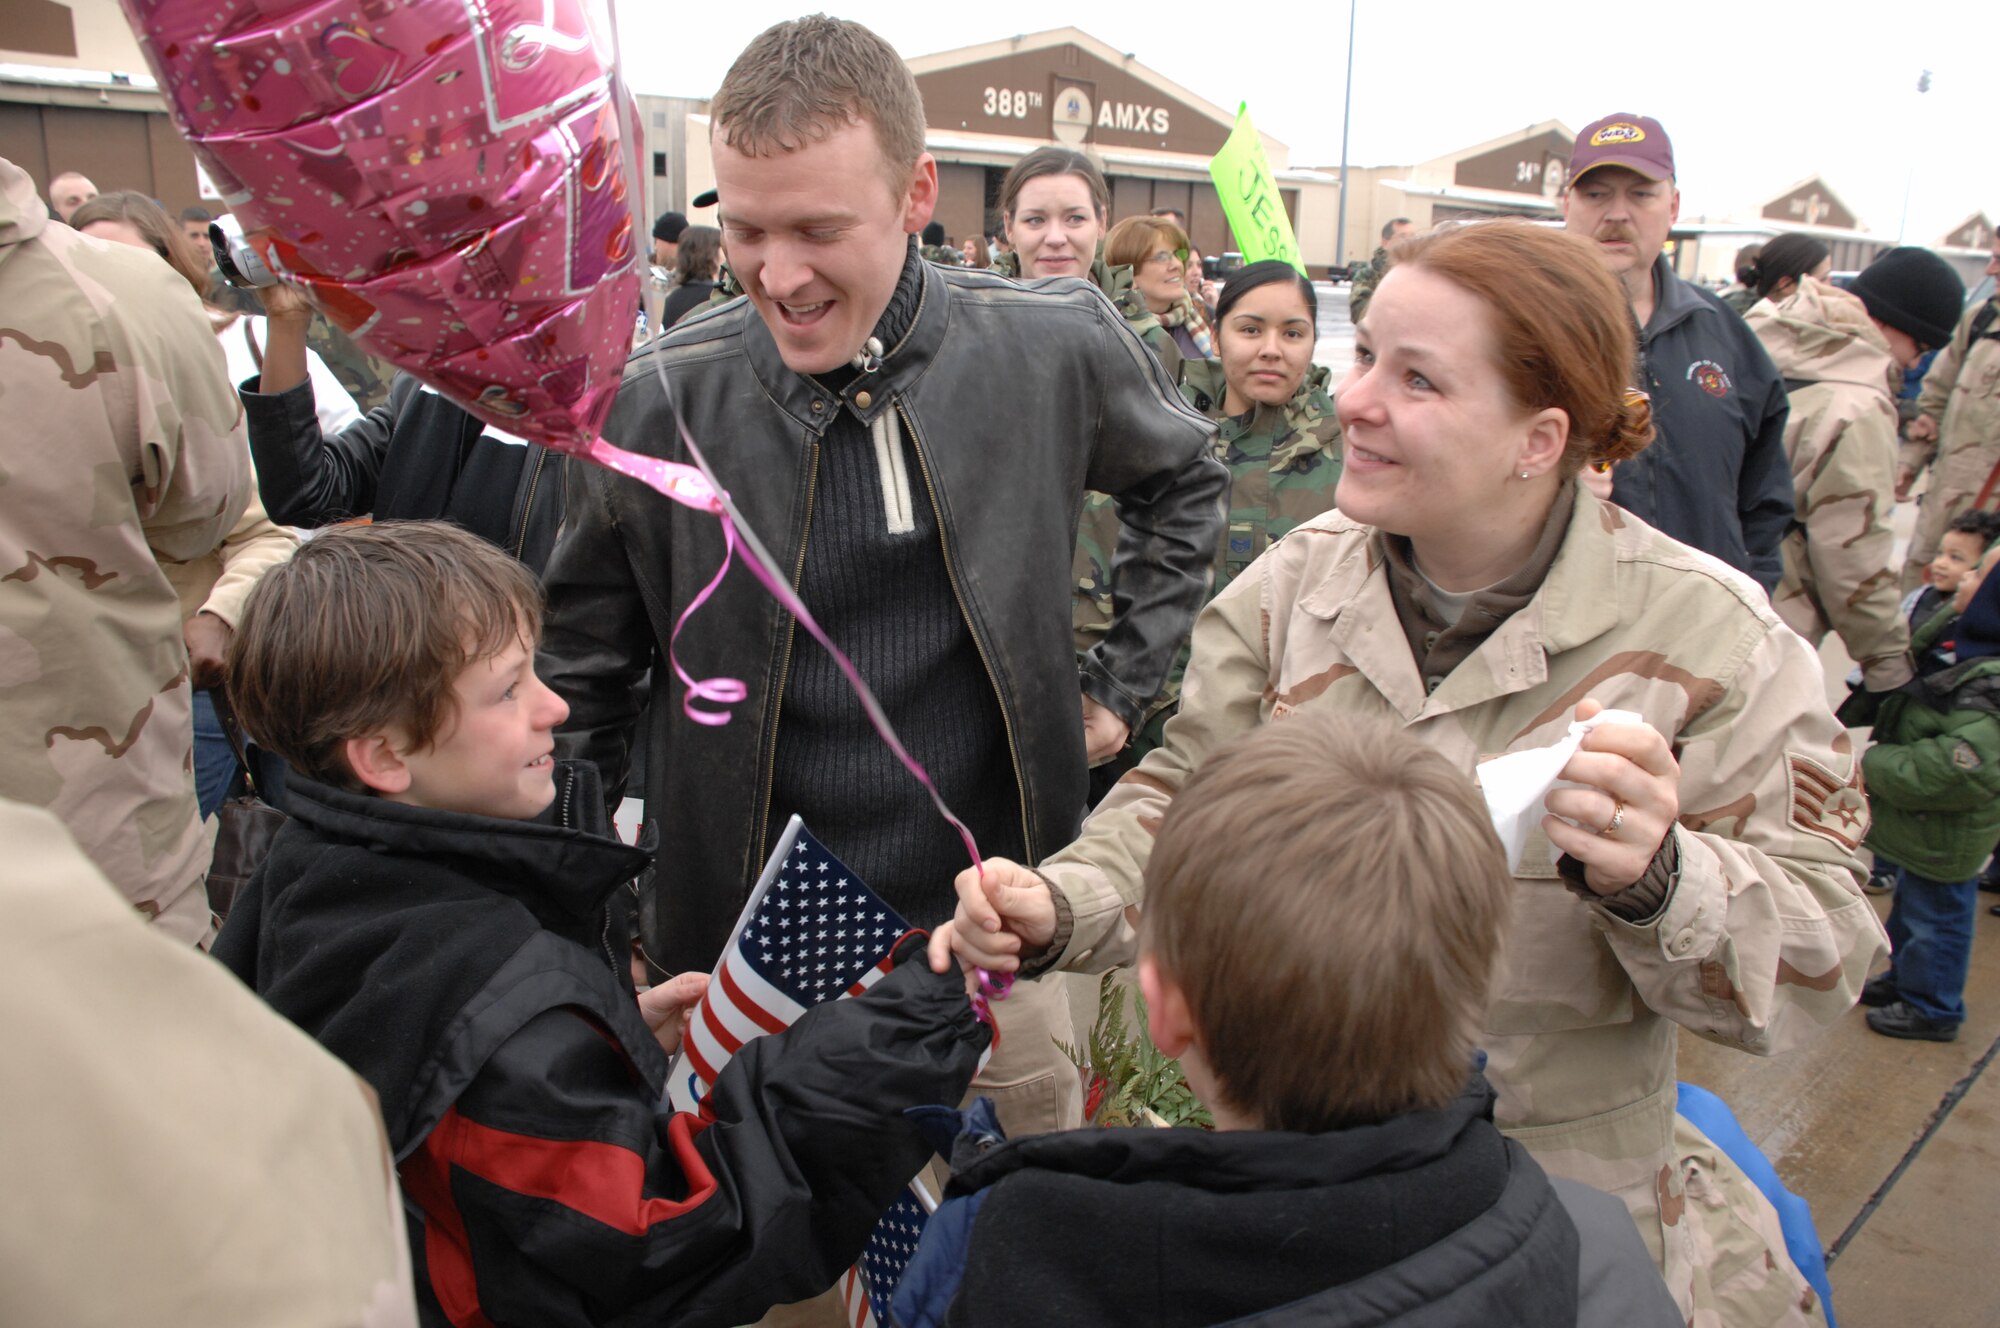 Staff Sgt. Christie Bryden, a 388th Maintenance Group Airman, is welcomed home by her family at the 4th Fighter Squadron's homecoming Jan. 8.  The 4th FS deployed to Balad Air Base, Iraq in August and flew approximately 1,800 missions in support of ground forces in Operation Iraqi Freedom.  (U.S. Air Force photo by Alex Lloyd)